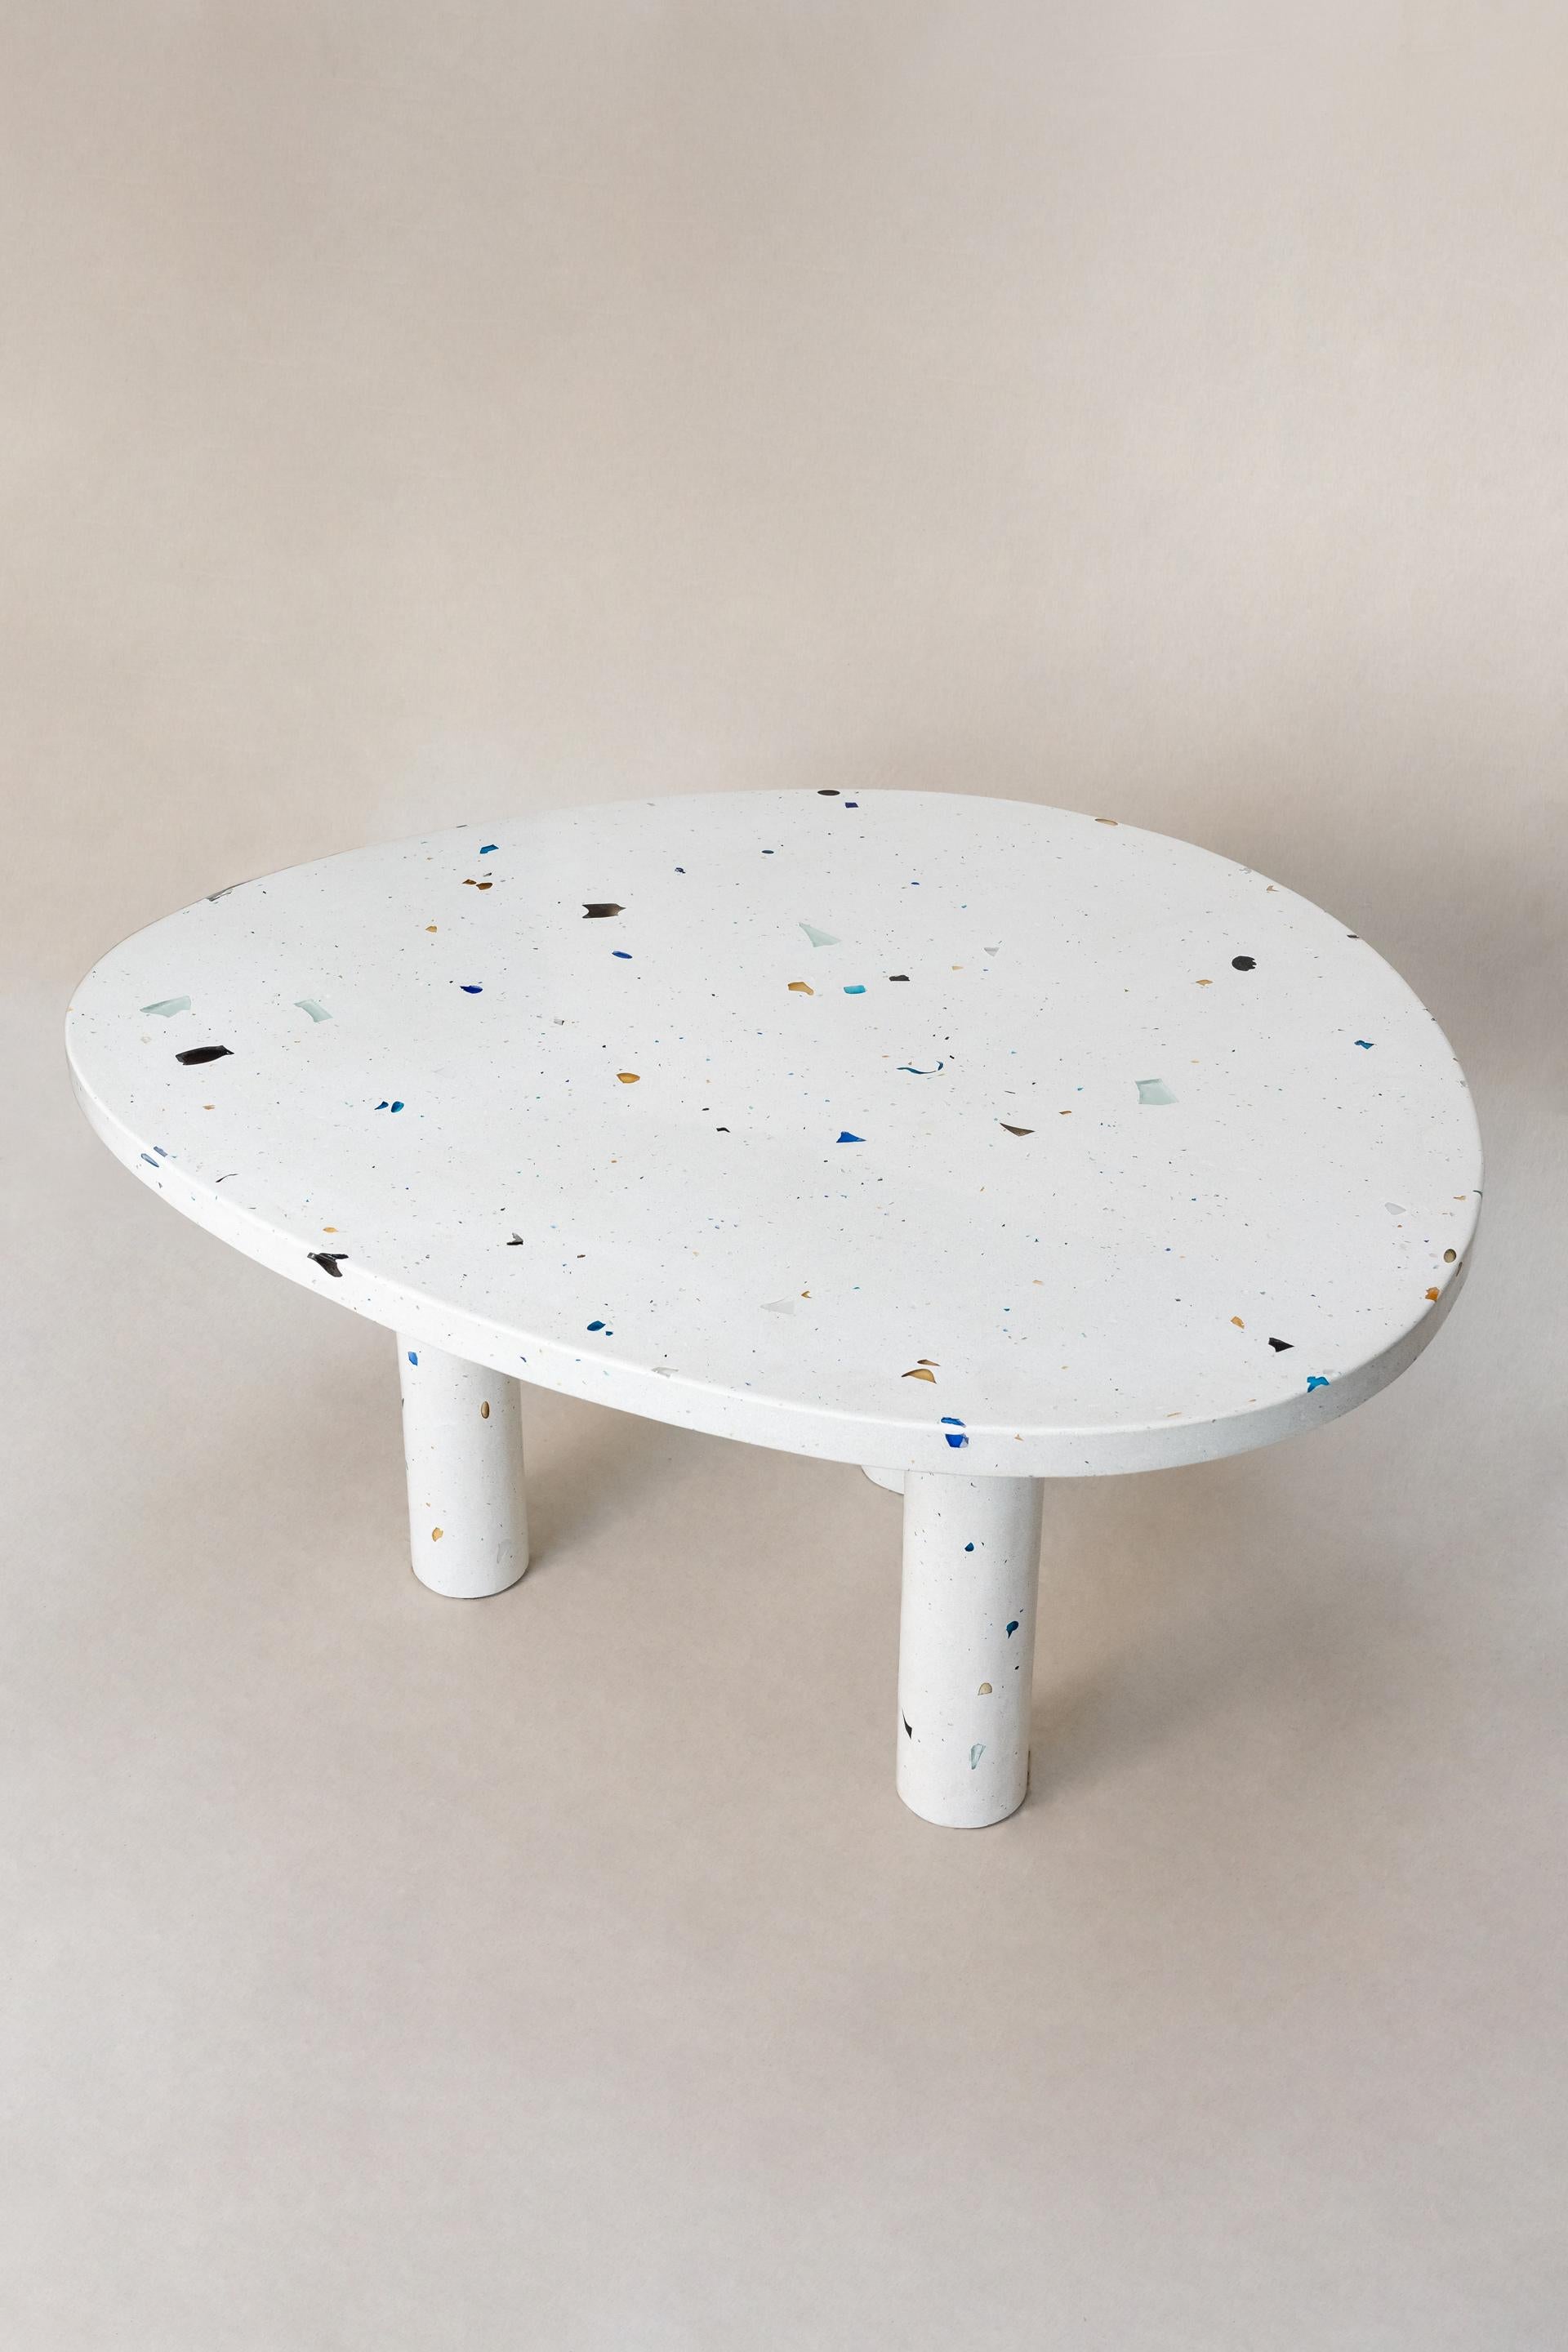 The Mono Dining Table (6 seats) takes part of the MONOMORFO collection. It has an amorphous top with 2 possible variations of shape. The terrazzo composition is made of leftover glass crystals from a glass crystal factory in Minas Gerais, Brazil.